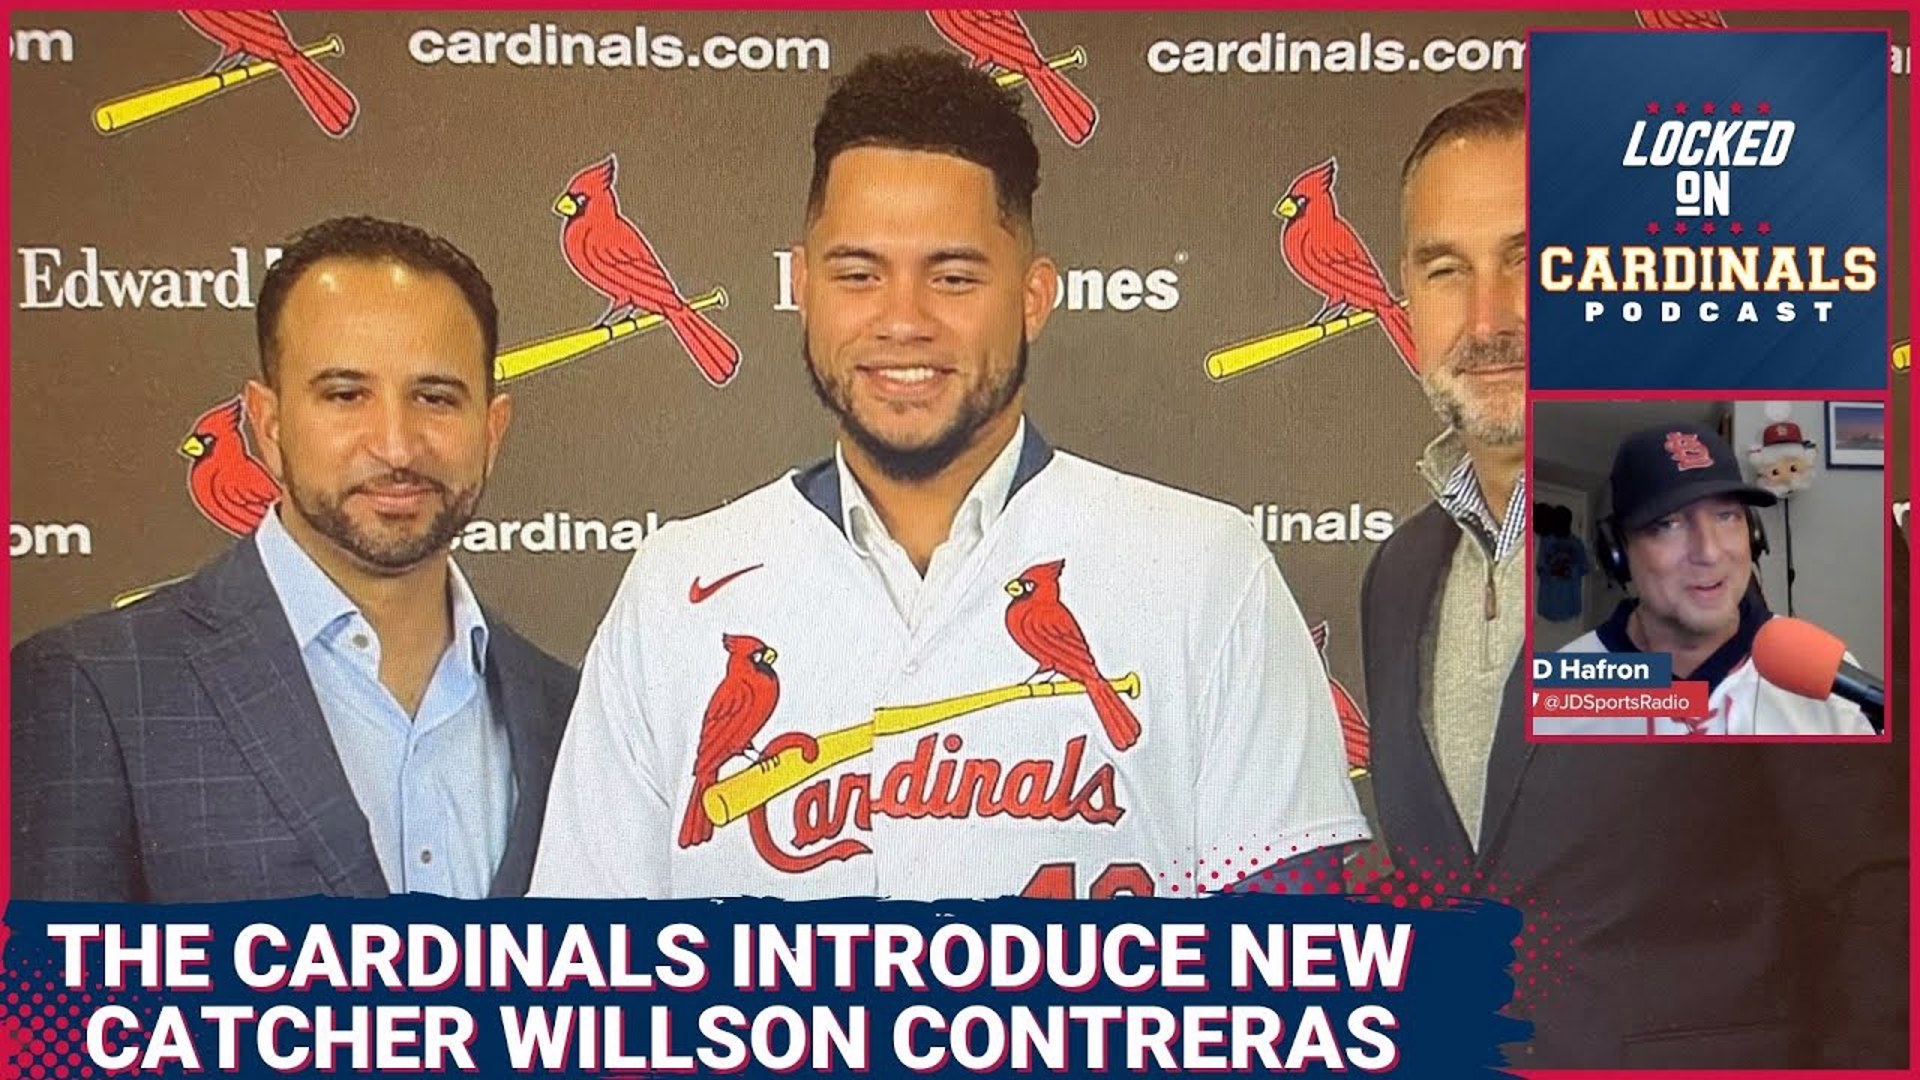 Contreras nails press conference but is he enough to take Cardinals to that  next level?, Locked On Cardinals